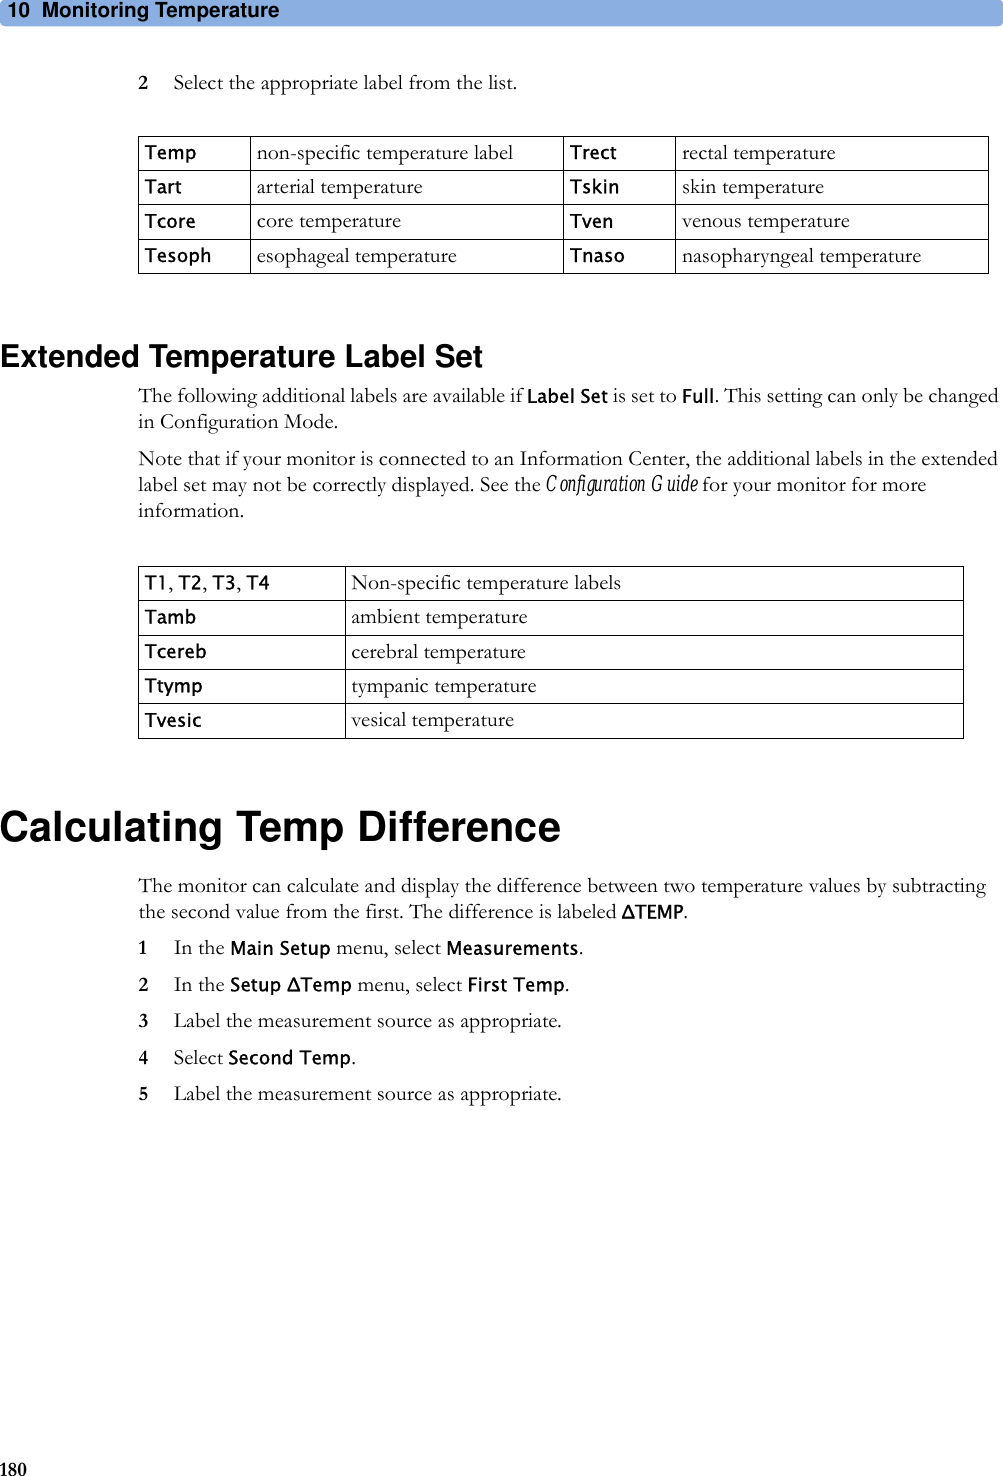 10 Monitoring Temperature1802Select the appropriate label from the list.Extended Temperature Label SetThe following additional labels are available if Label Set is set to Full. This setting can only be changed in Configuration Mode.Note that if your monitor is connected to an Information Center, the additional labels in the extended label set may not be correctly displayed. See the Configuration Guide for your monitor for more information.Calculating Temp DifferenceThe monitor can calculate and display the difference between two temperature values by subtracting the second value from the first. The difference is labeled ΔTEMP.1In the Main Setup menu, select Measurements.2In the Setup ΔTemp menu, select First Temp.3Label the measurement source as appropriate.4Select Second Temp.5Label the measurement source as appropriate.Temp non-specific temperature label Trect rectal temperatureTart arterial temperature Tskin skin temperatureTcore core temperature Tven venous temperatureTesoph esophageal temperature Tnaso nasopharyngeal temperatureT1, T2, T3, T4 Non-specific temperature labelsTamb ambient temperatureTcereb cerebral temperatureTtymp tympanic temperatureTvesic vesical temperature